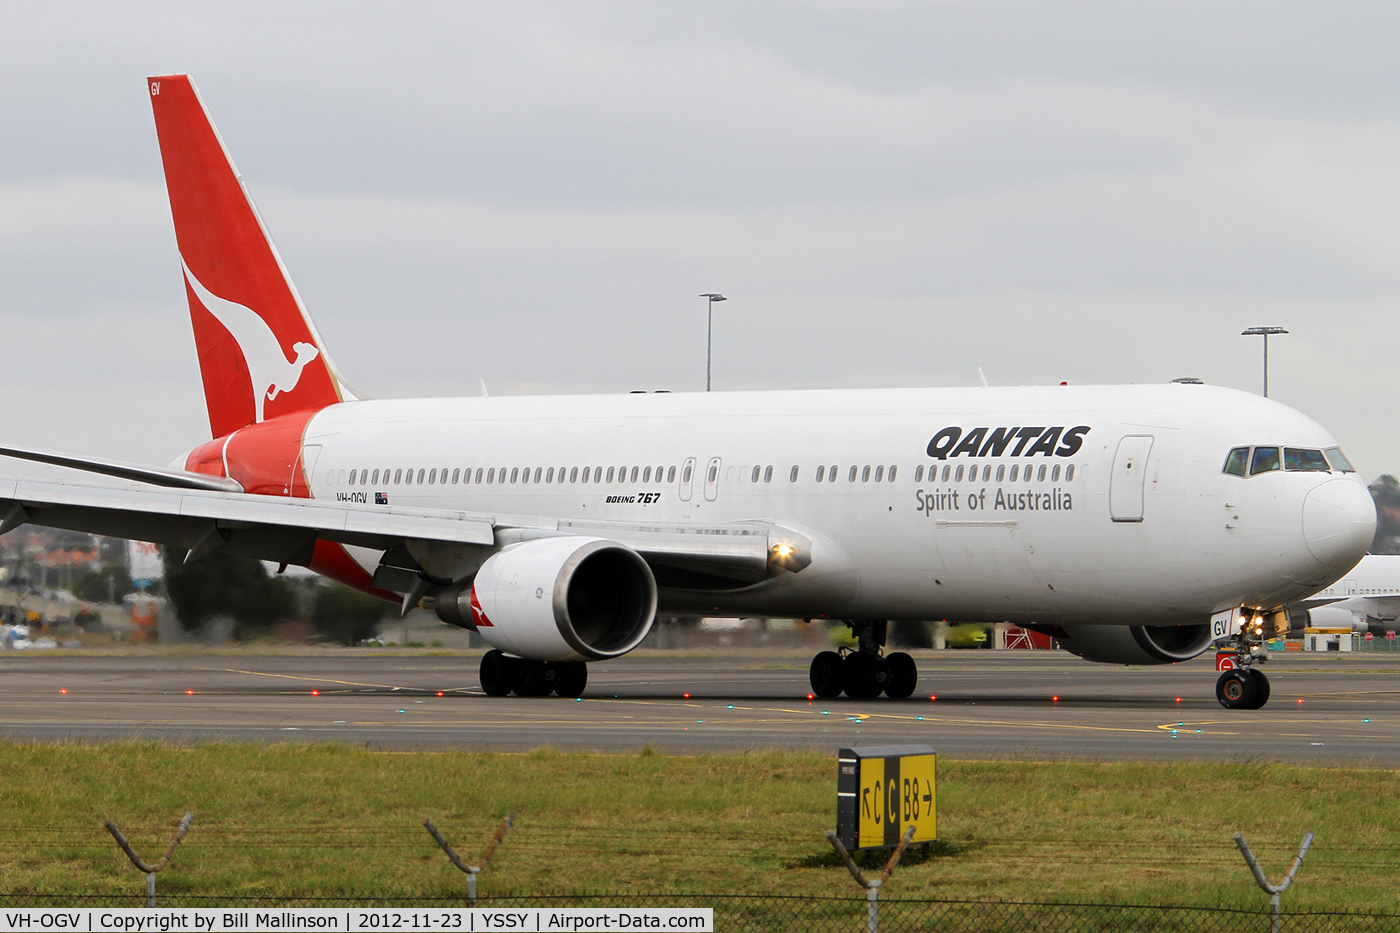 VH-OGV, 2000 Boeing 767-338 C/N 30186, TAXI FROM 34R